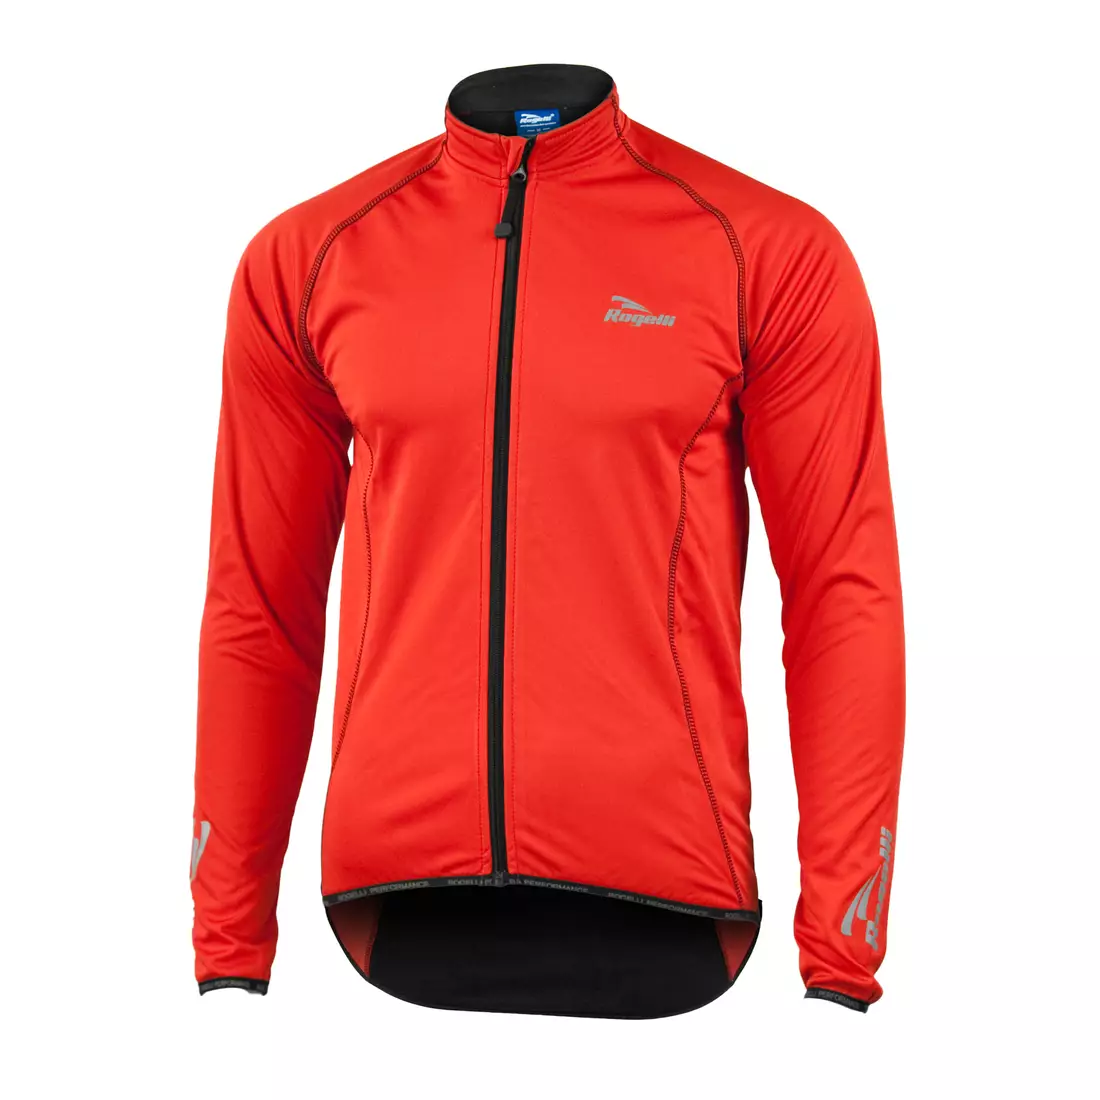 ROGELLI PESARO - men's Softshell cycling jacket, color: Red